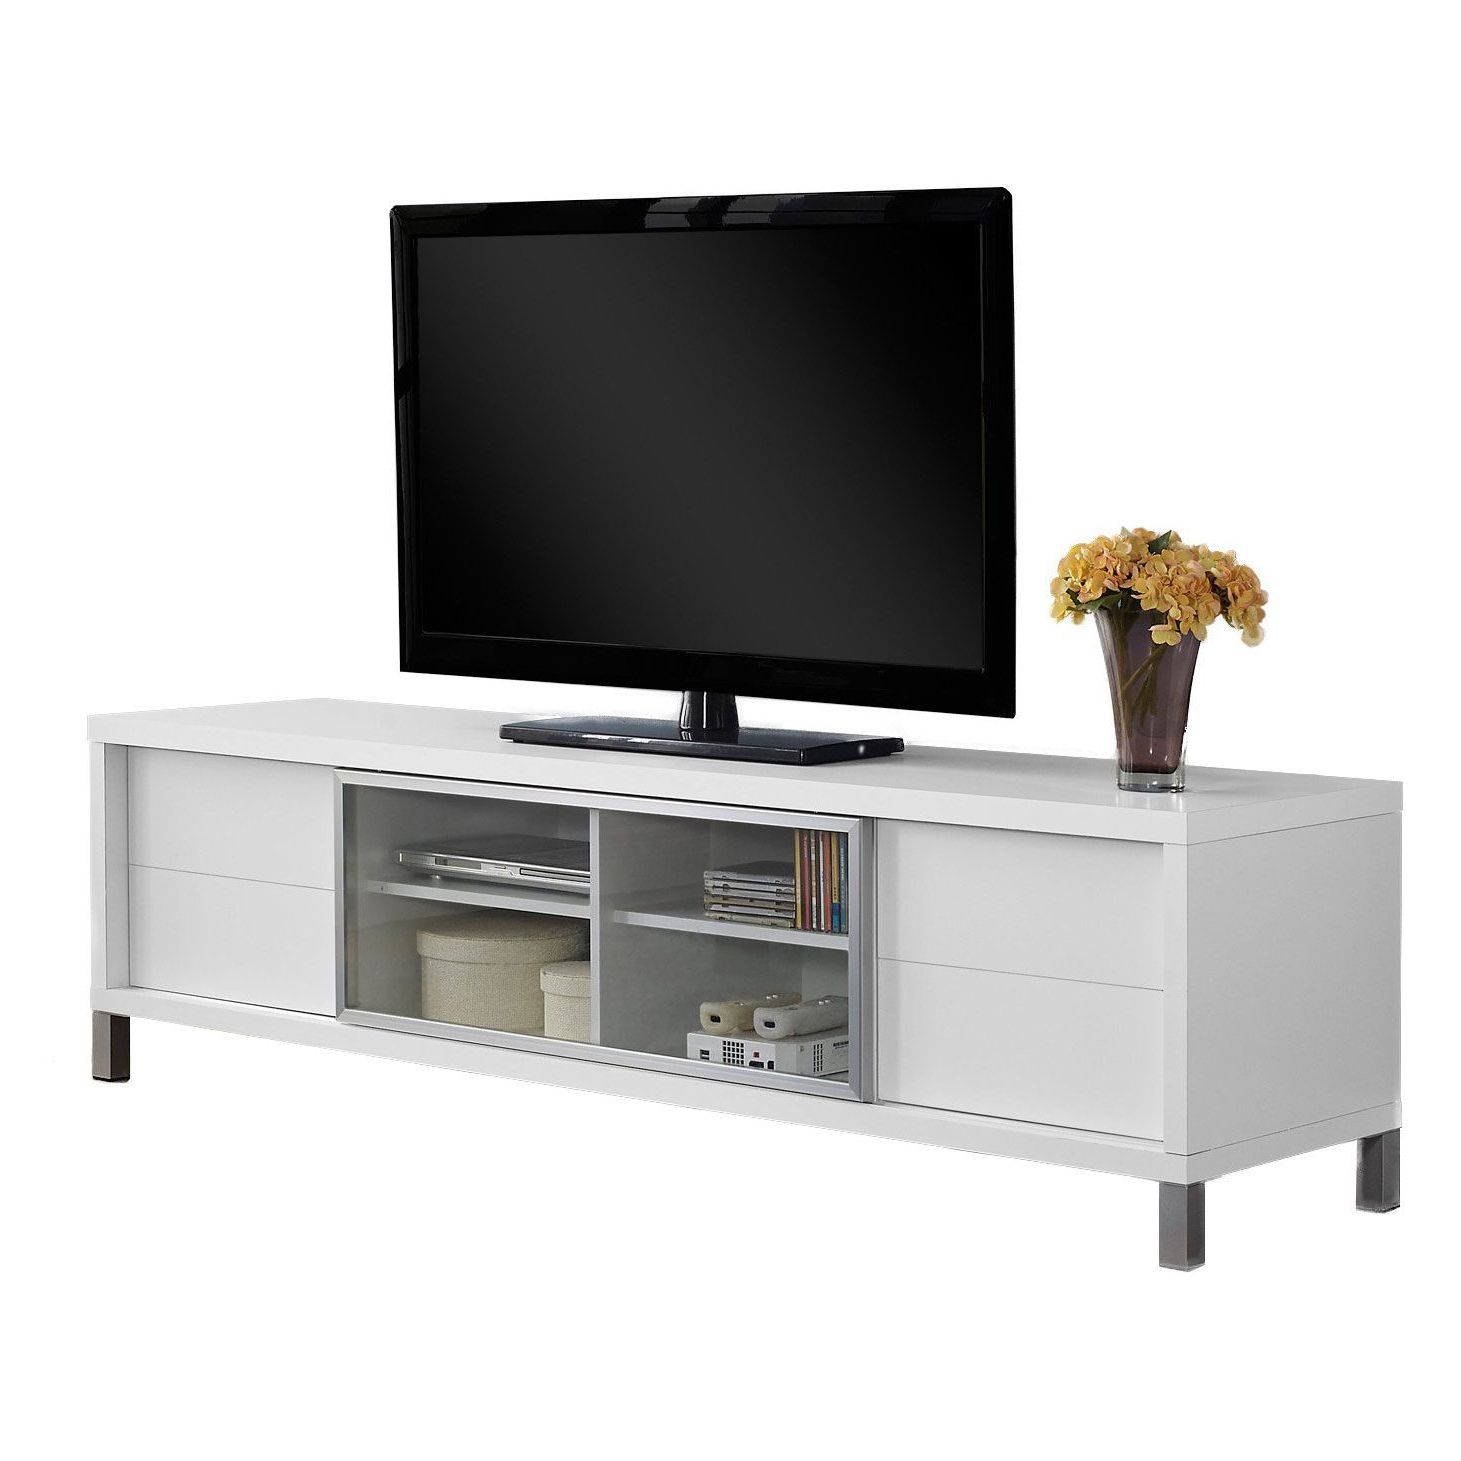 Kinsella Tv Stands For Tvs Up To 70" Intended For Favorite Monarch Tv Stand White Euro Style For Tvs Up To 70"l (View 2 of 25)